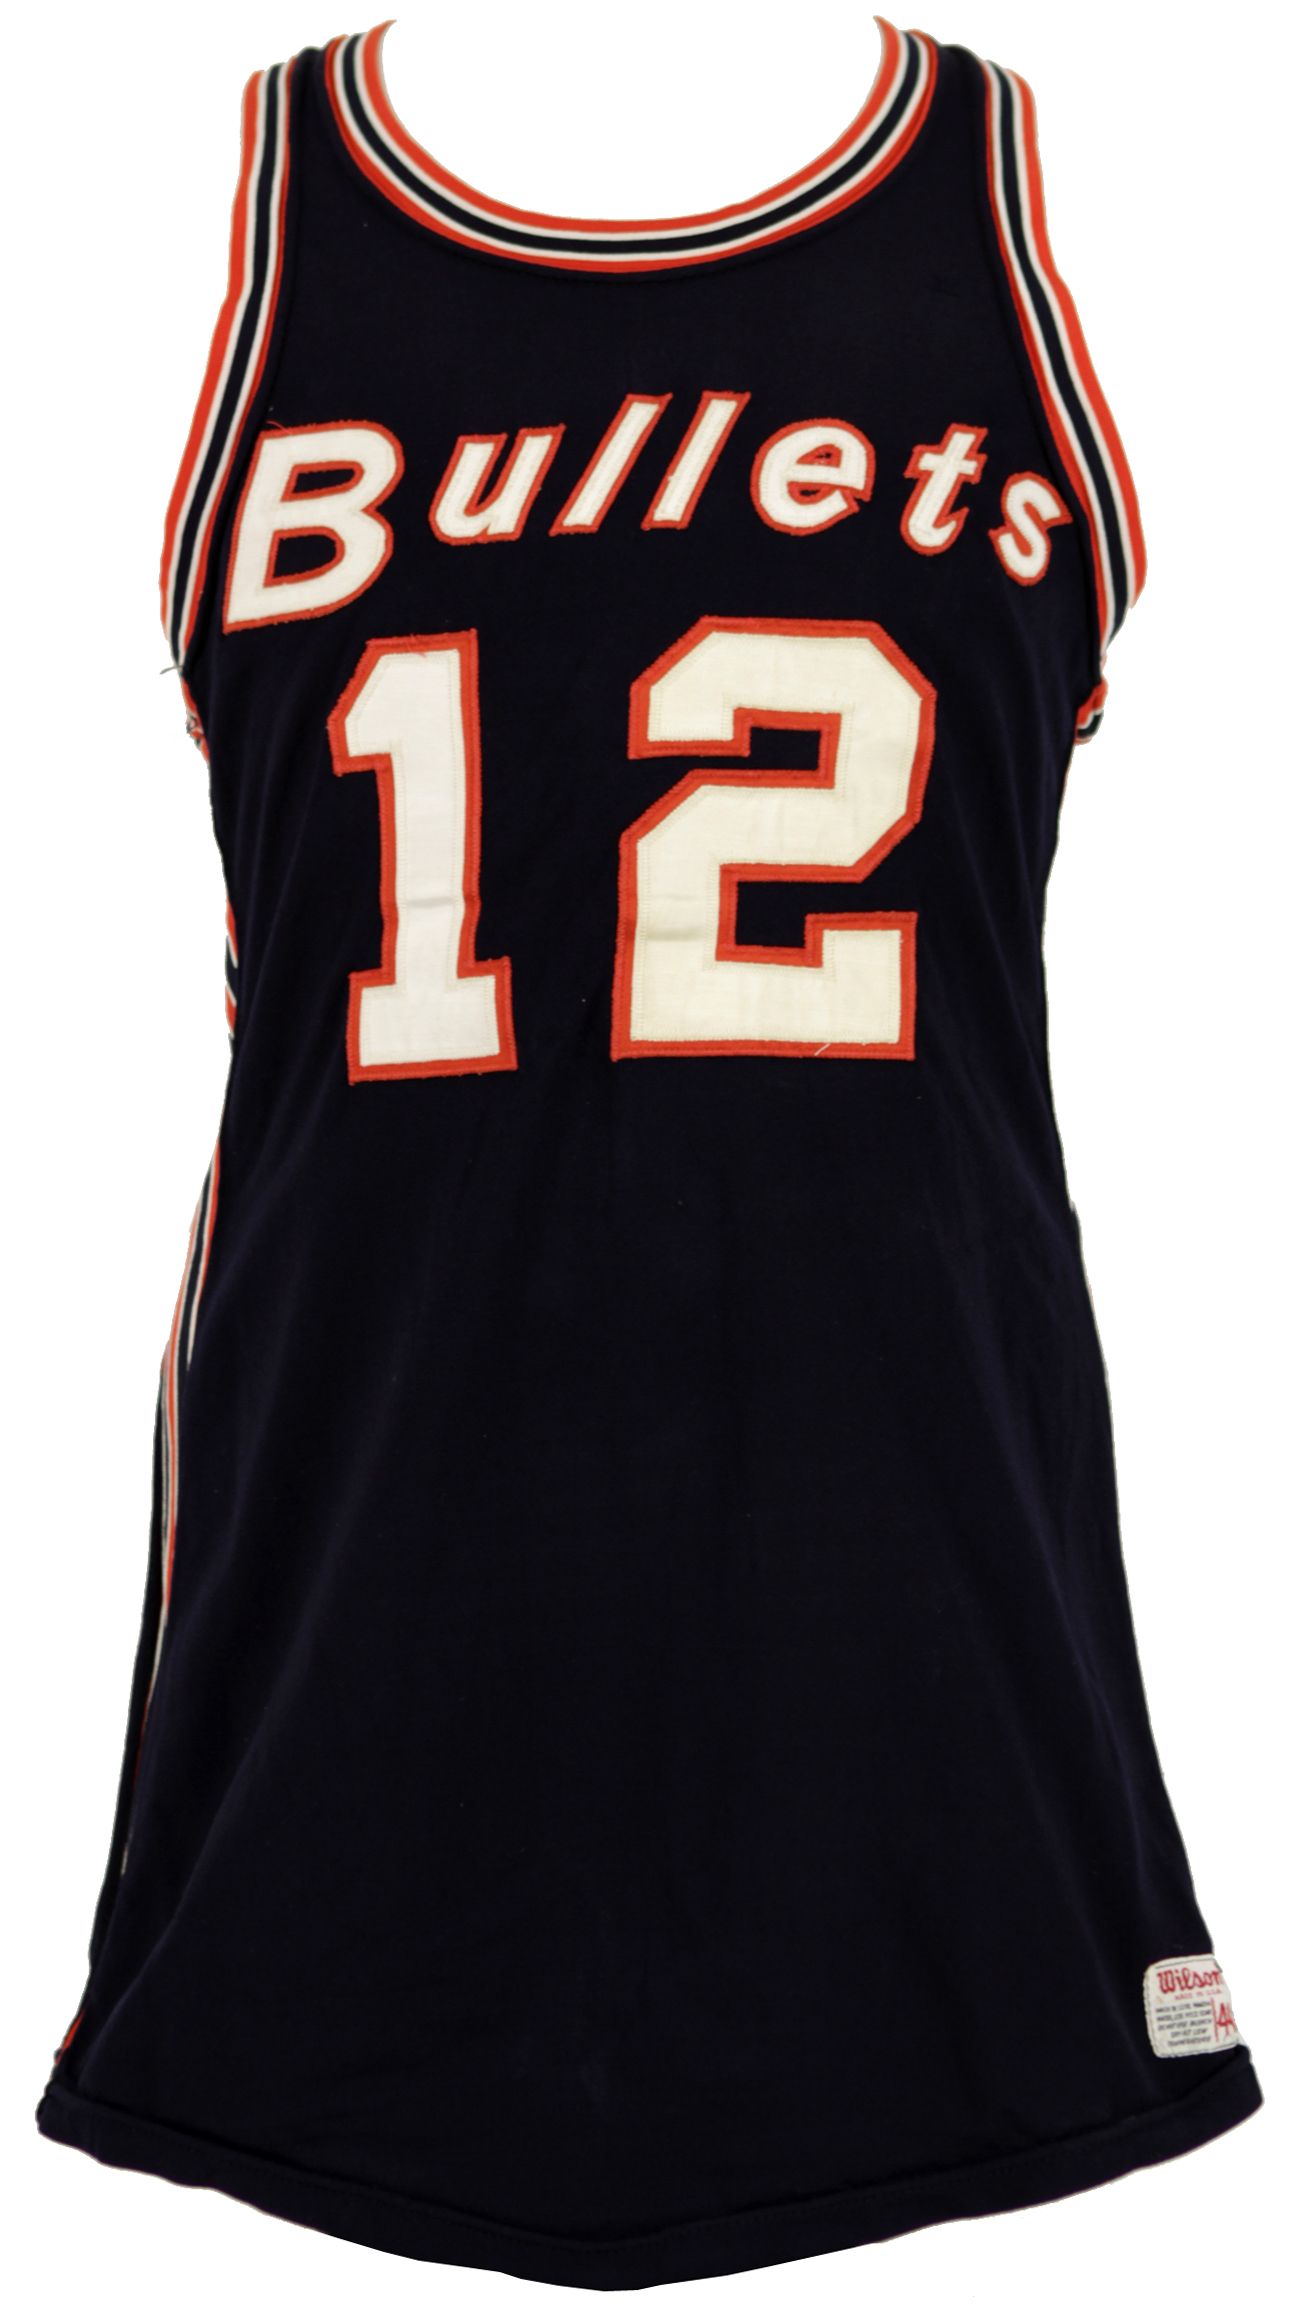 baltimore bullets jersey